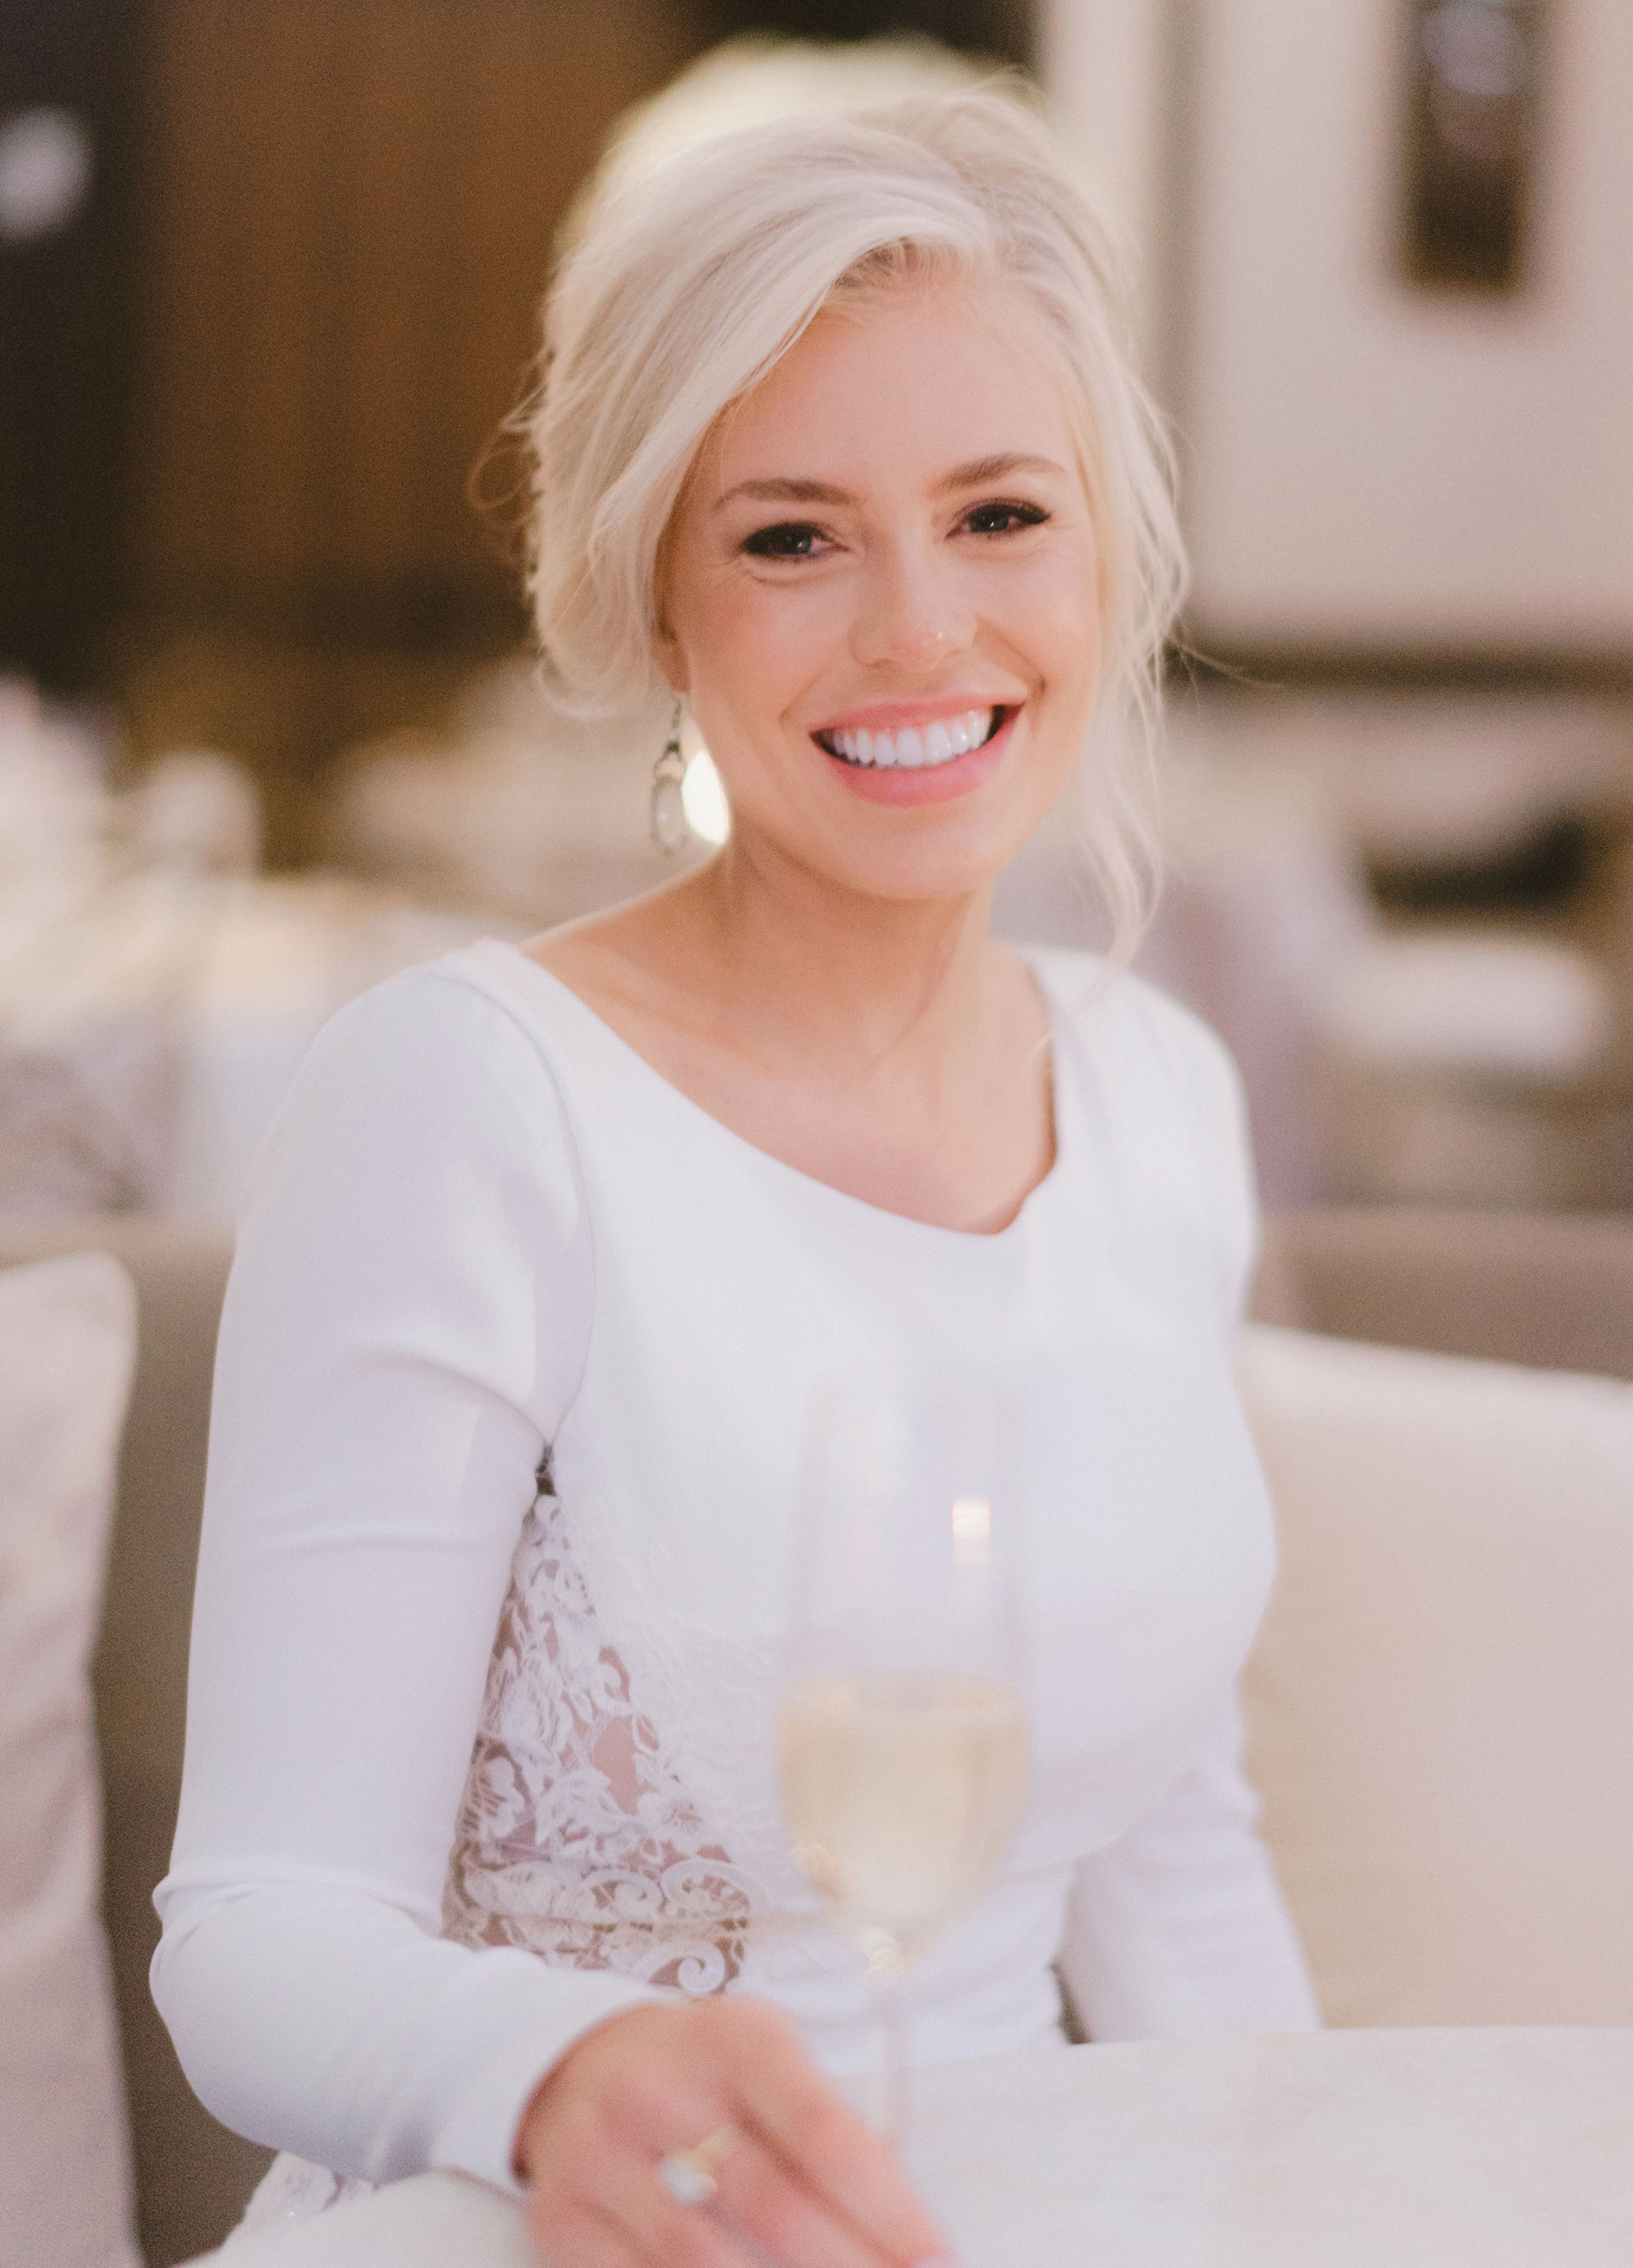 A bride smiles with her hair pulled back and wearing a longsleeve dress with lace cutouts on the sides for her romantic ballroom wedding.